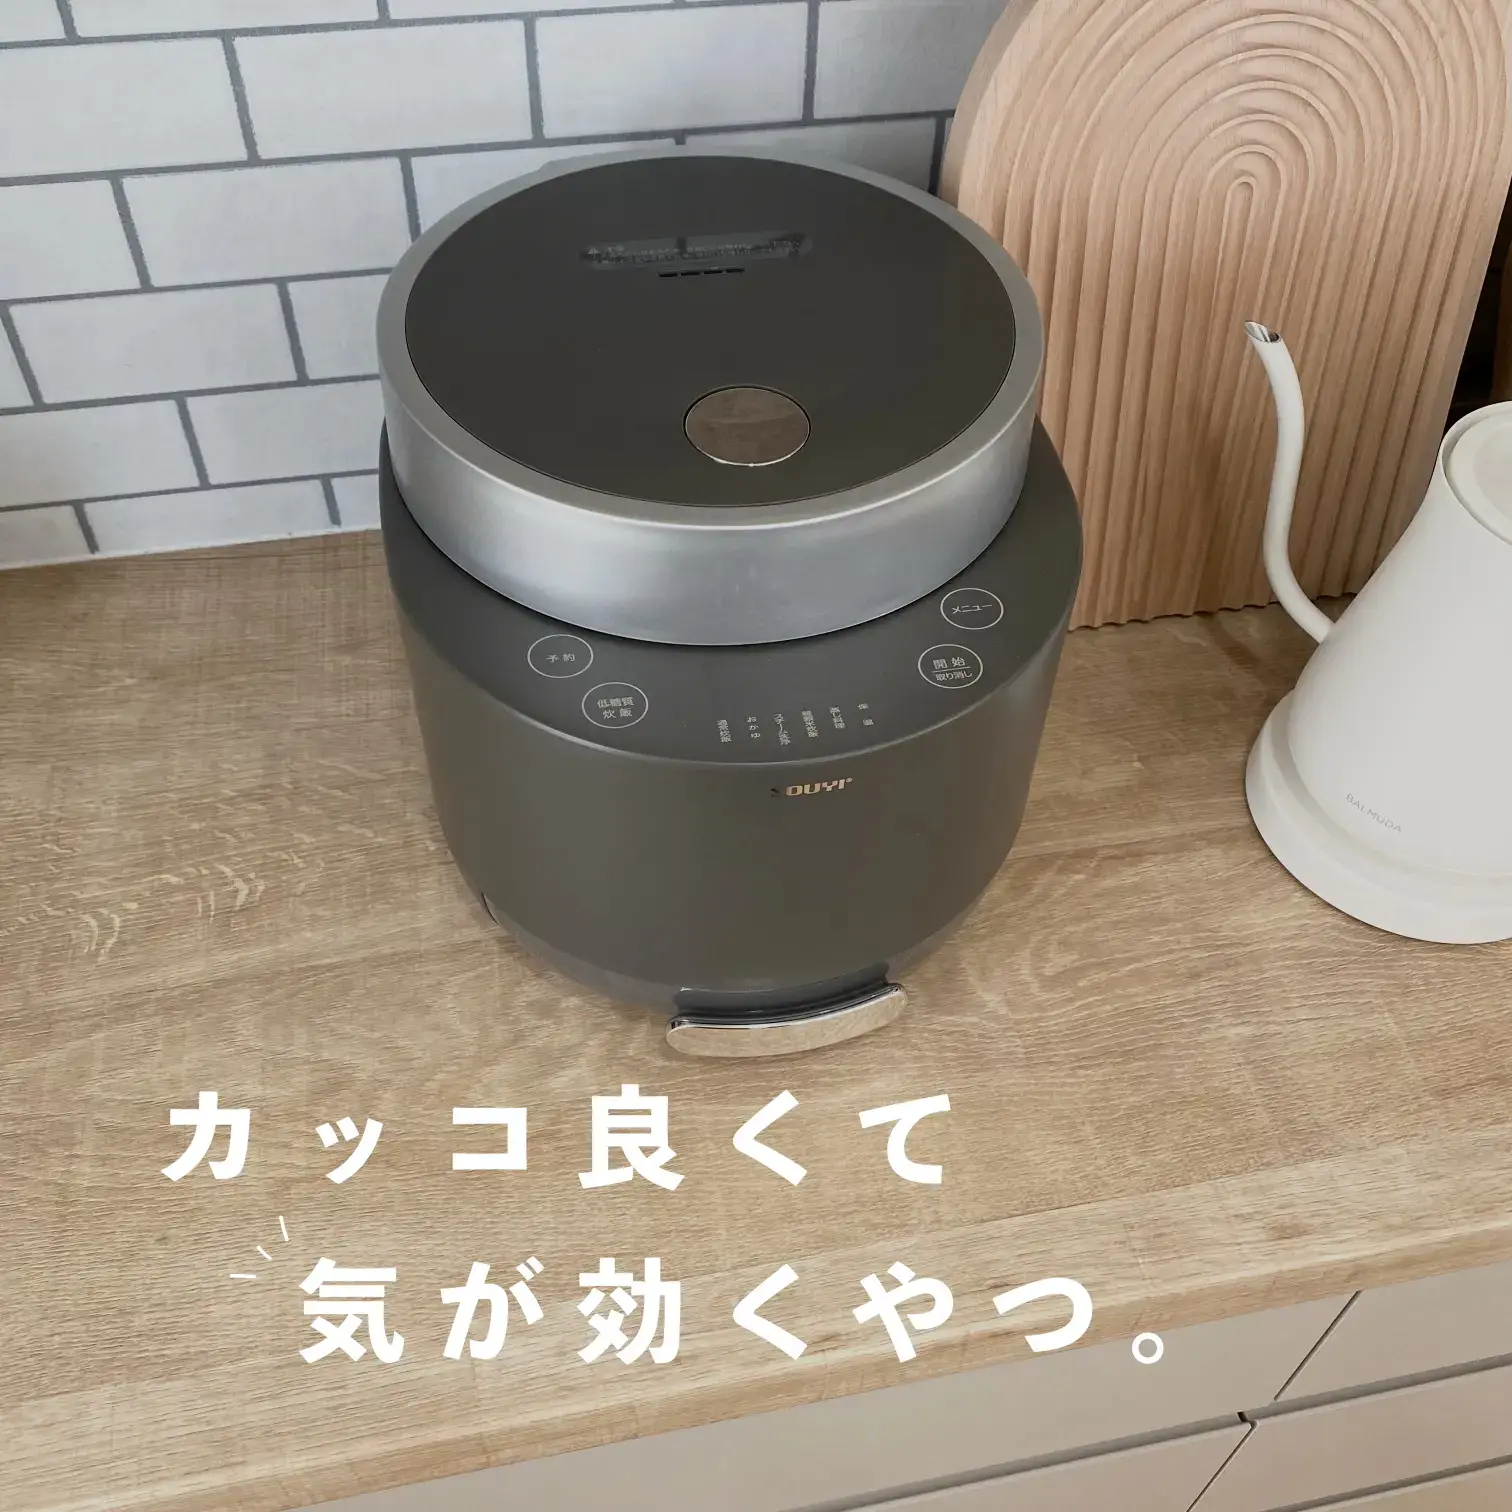 Carbohydrate cut rice cooker / low calorie, Gallery posted by _____nutsさん